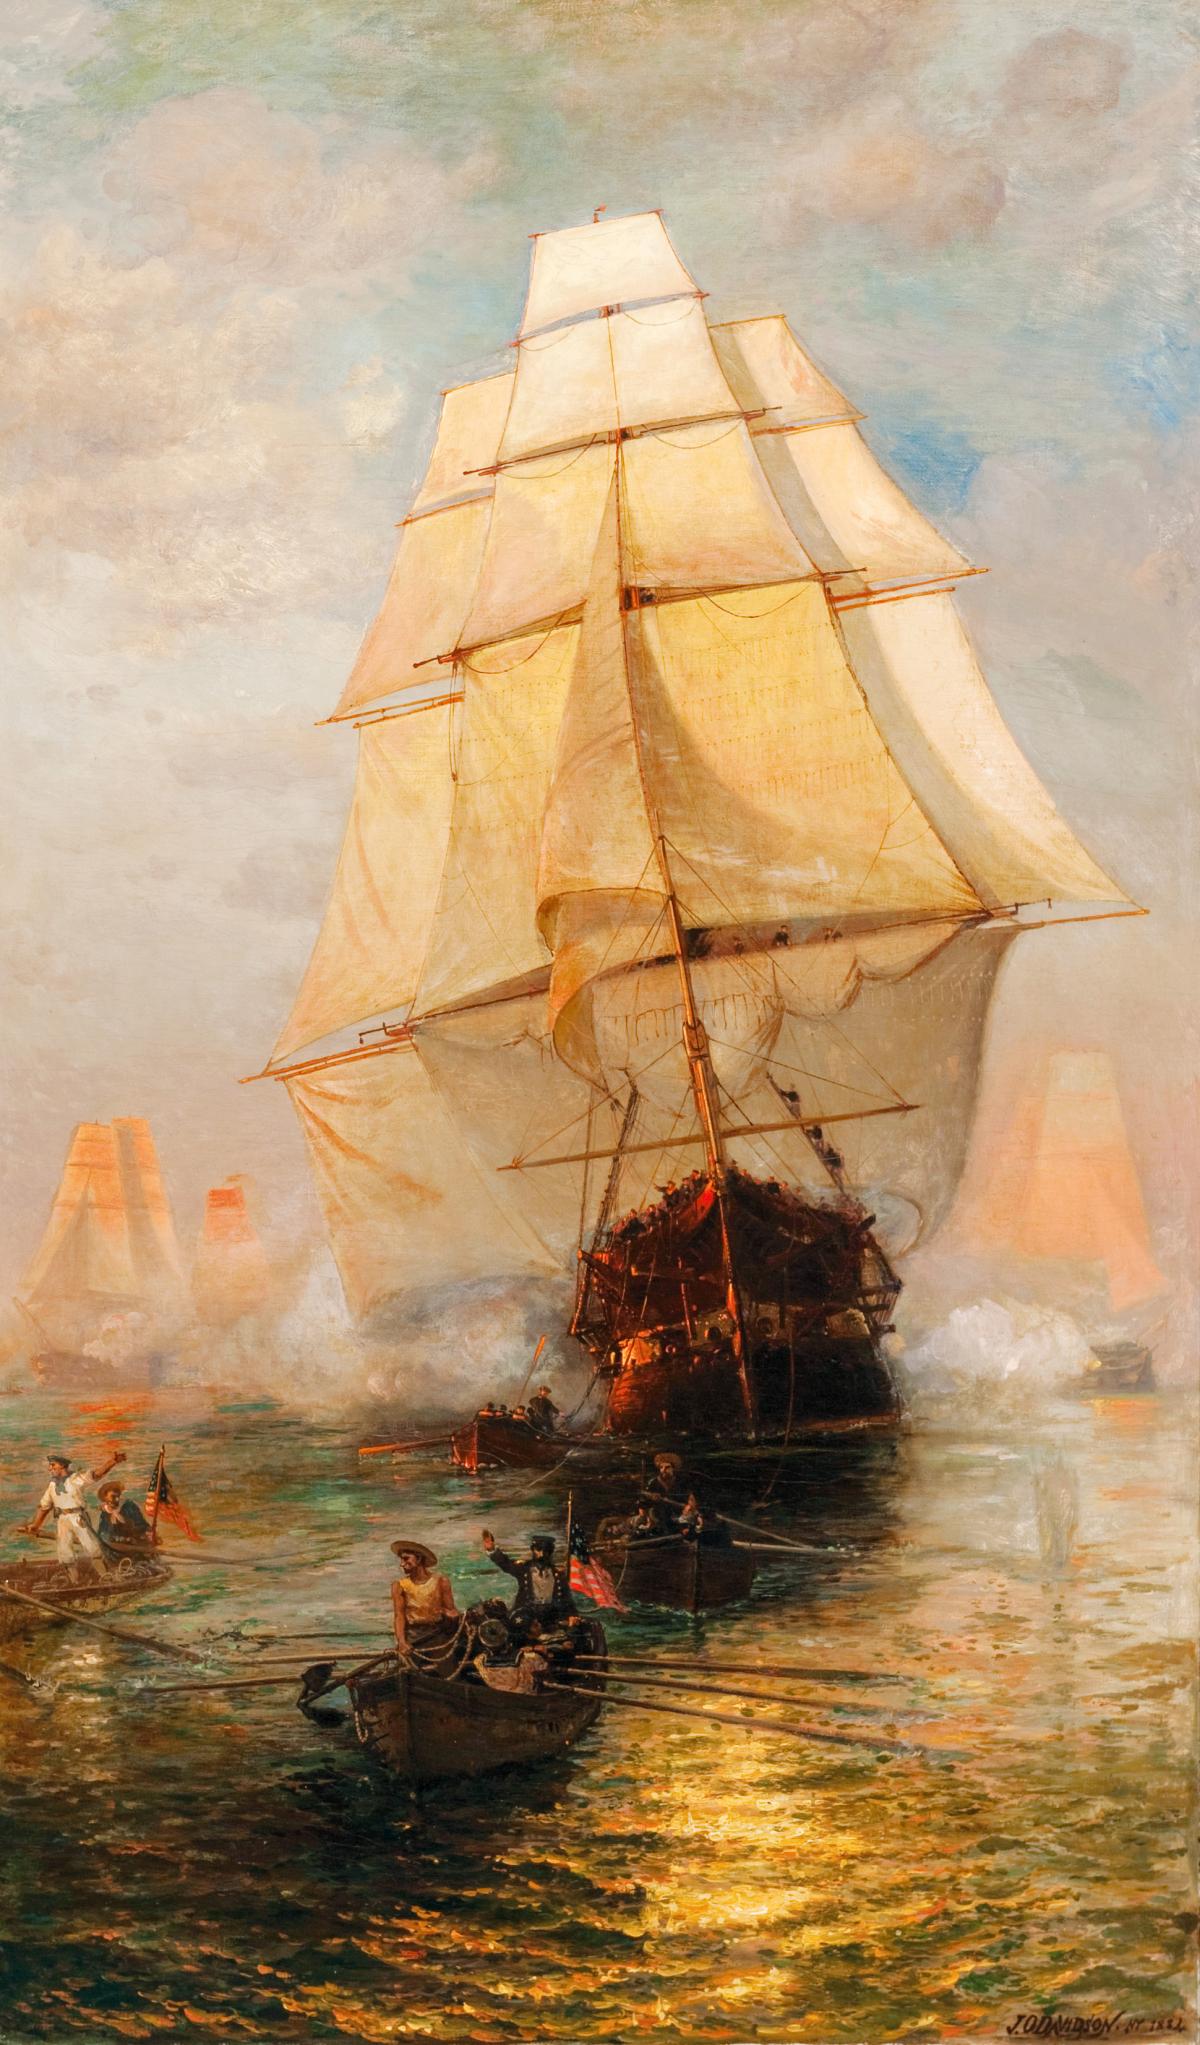 Julian O. Davidson’s 1884 USS Constitution Escaping the British, July 1812